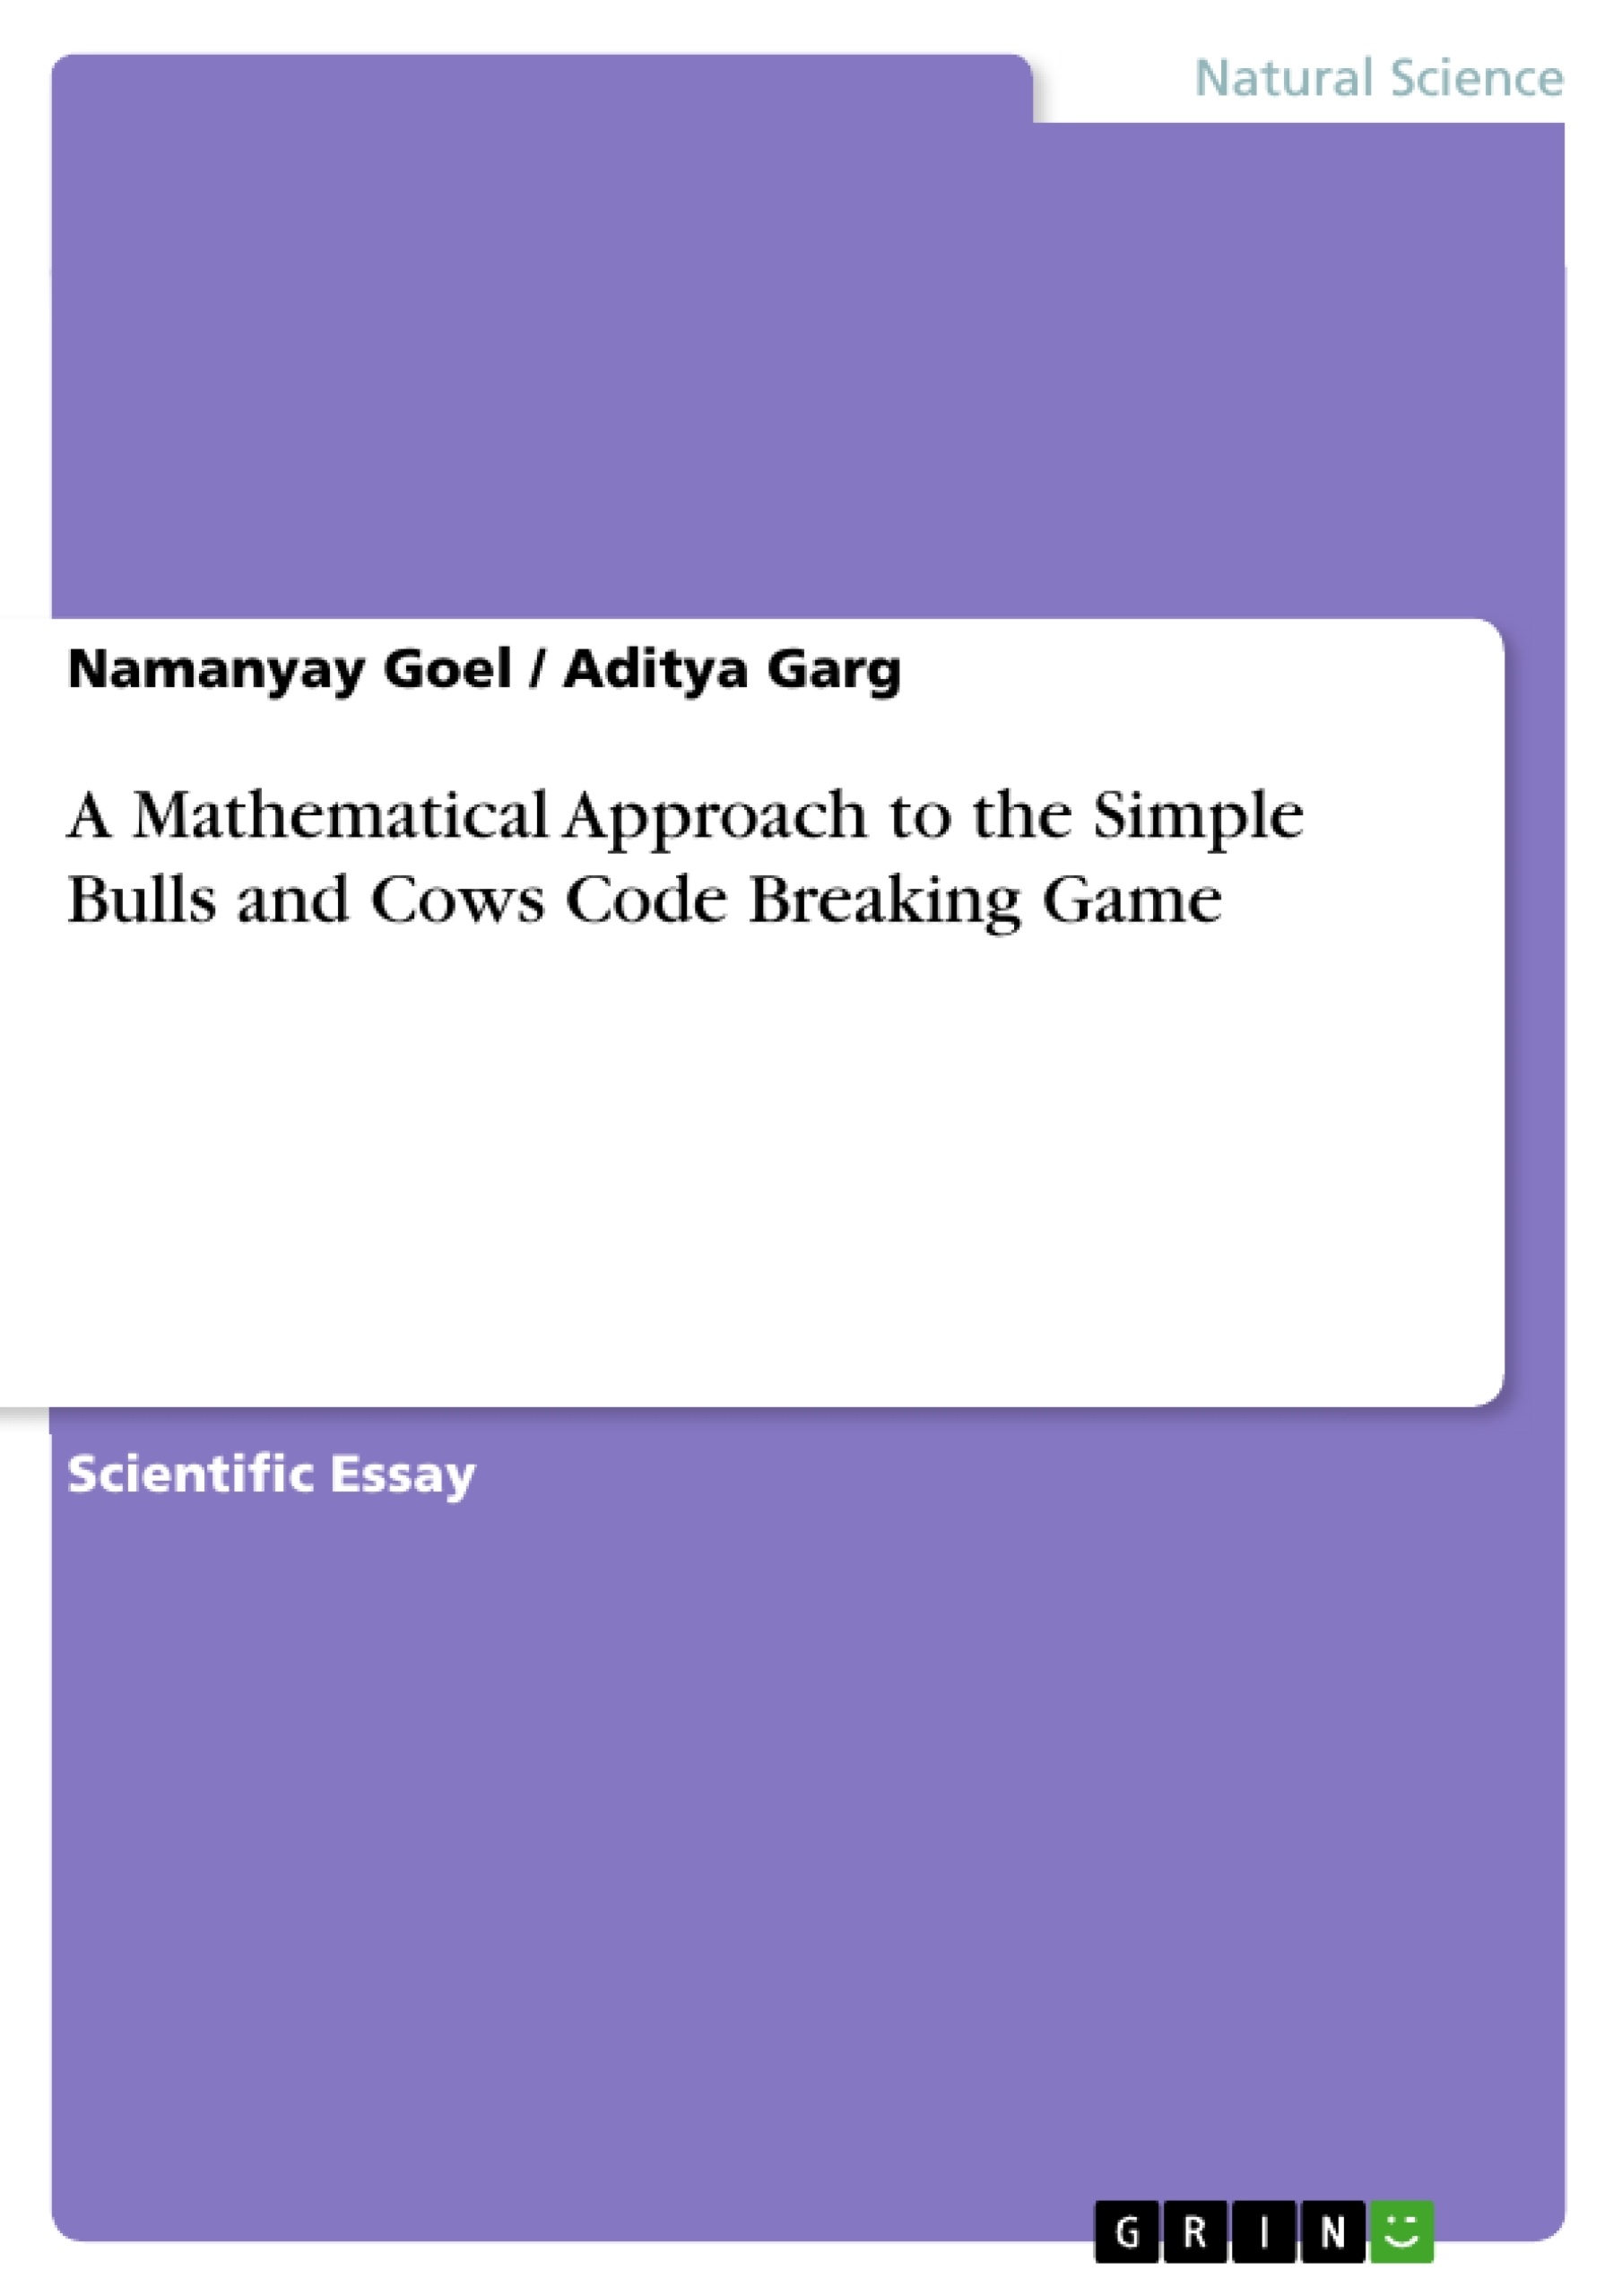 Title: A Mathematical Approach to the Simple Bulls and Cows Code Breaking Game